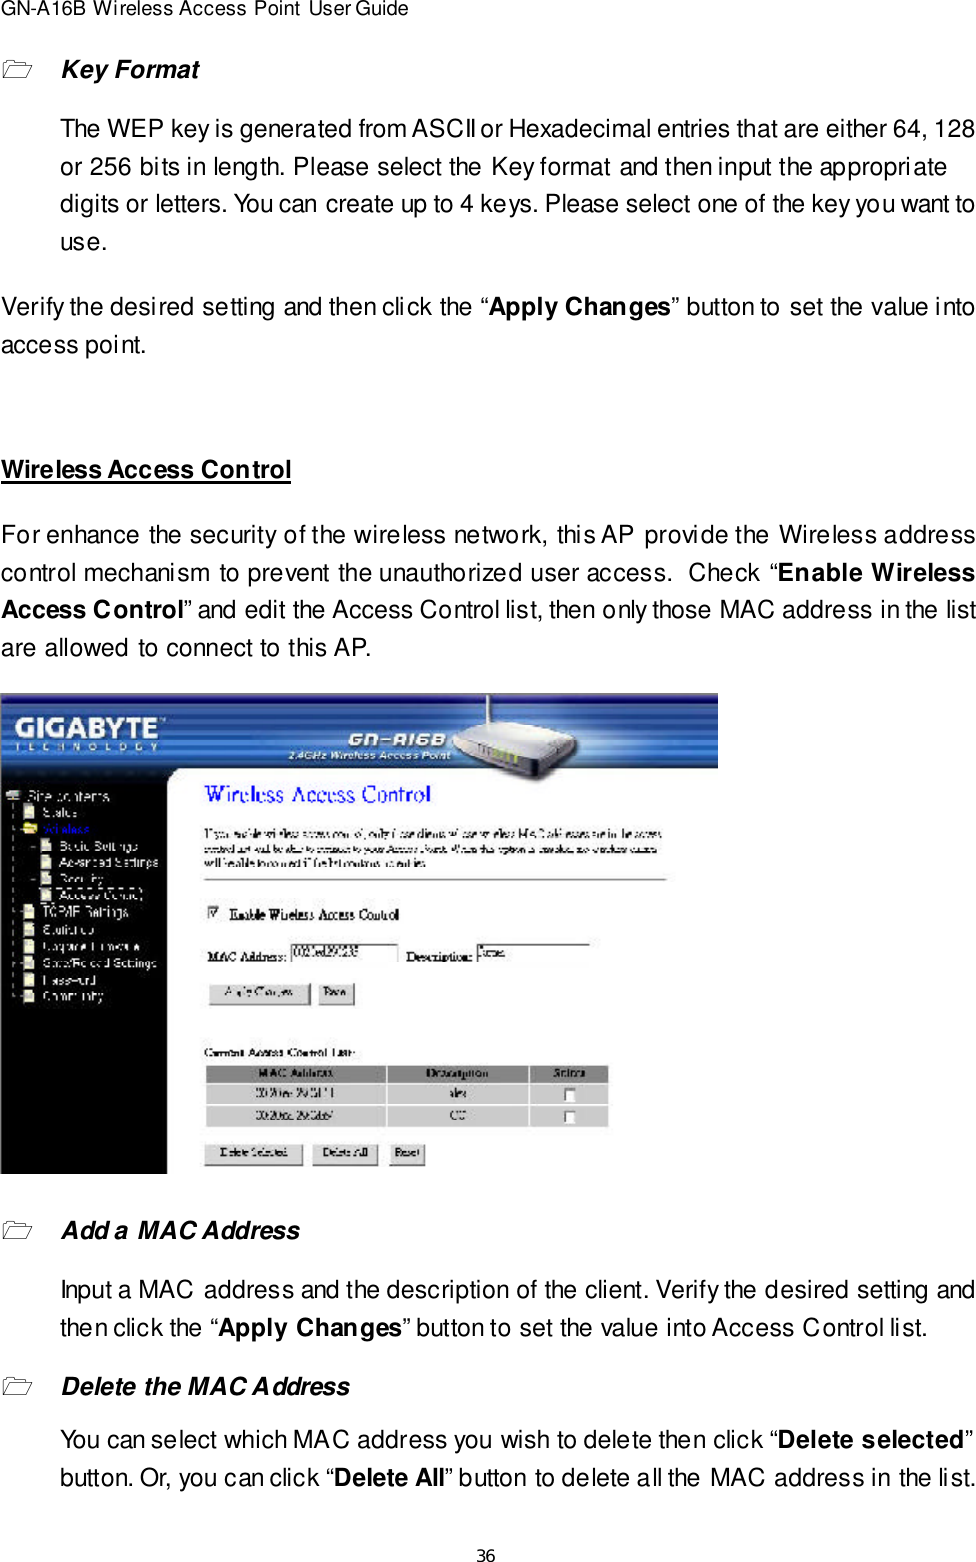 36GN-A16B Wireless Access Point User Guide1Key FormatThe WEP key is generated from ASCII or Hexadecimal entries that are either 64, 128or 256 bits in length. Please select the Key format and then input the appropriatedigits or letters. You can create up to 4 keys. Please select one of the key you want touse.Verify the desired setting and then click the “Apply Changes” button to set the value intoaccess point.Wireless Access ControlFor enhance the security of the wireless network, this AP provide the Wireless addresscontrol mechanism to prevent the unauthorized user access.  Check “Enable WirelessAccess Control” and edit the Access Control list, then only those MAC address in the listare allowed to connect to this AP.1Add a MAC AddressInput a MAC address and the description of the client. Verify the desired setting andthen click the “Apply Changes” button to set the value into Access Control list.1Delete the MAC AddressYou can select which MAC address you wish to delete then click “Delete selected”button. Or, you can click “Delete All” button to delete all the MAC address in the list.